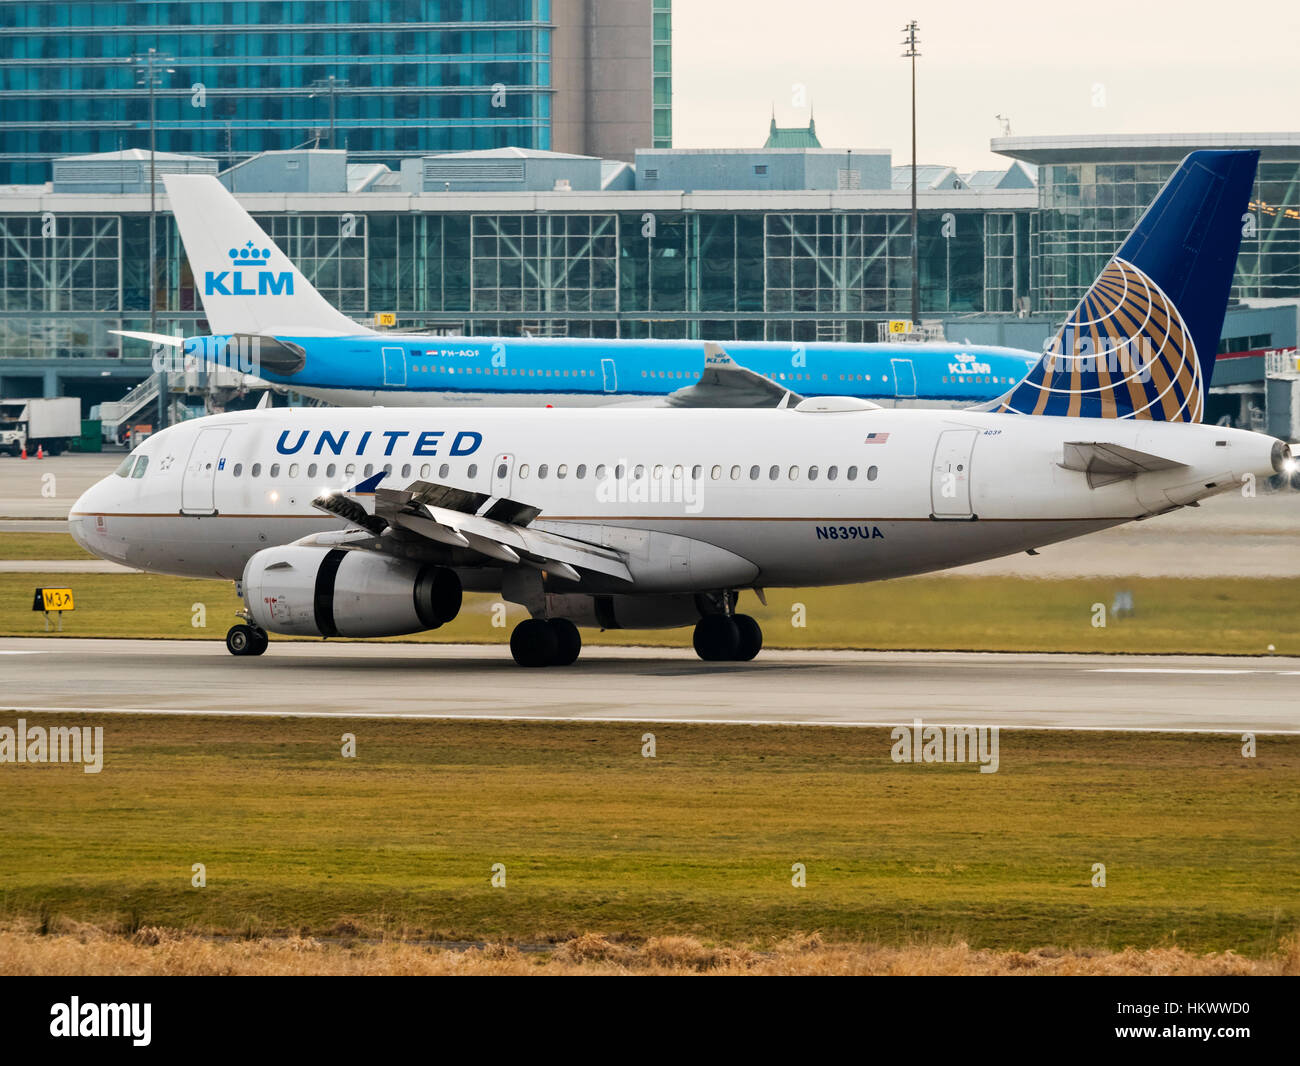 A United Airlines Airbus A319 (N839UA) narrow-body jet airliner lands at Vancouver International Airport, Richmond, B.C., January 26, 2017. In the bac Stock Photo